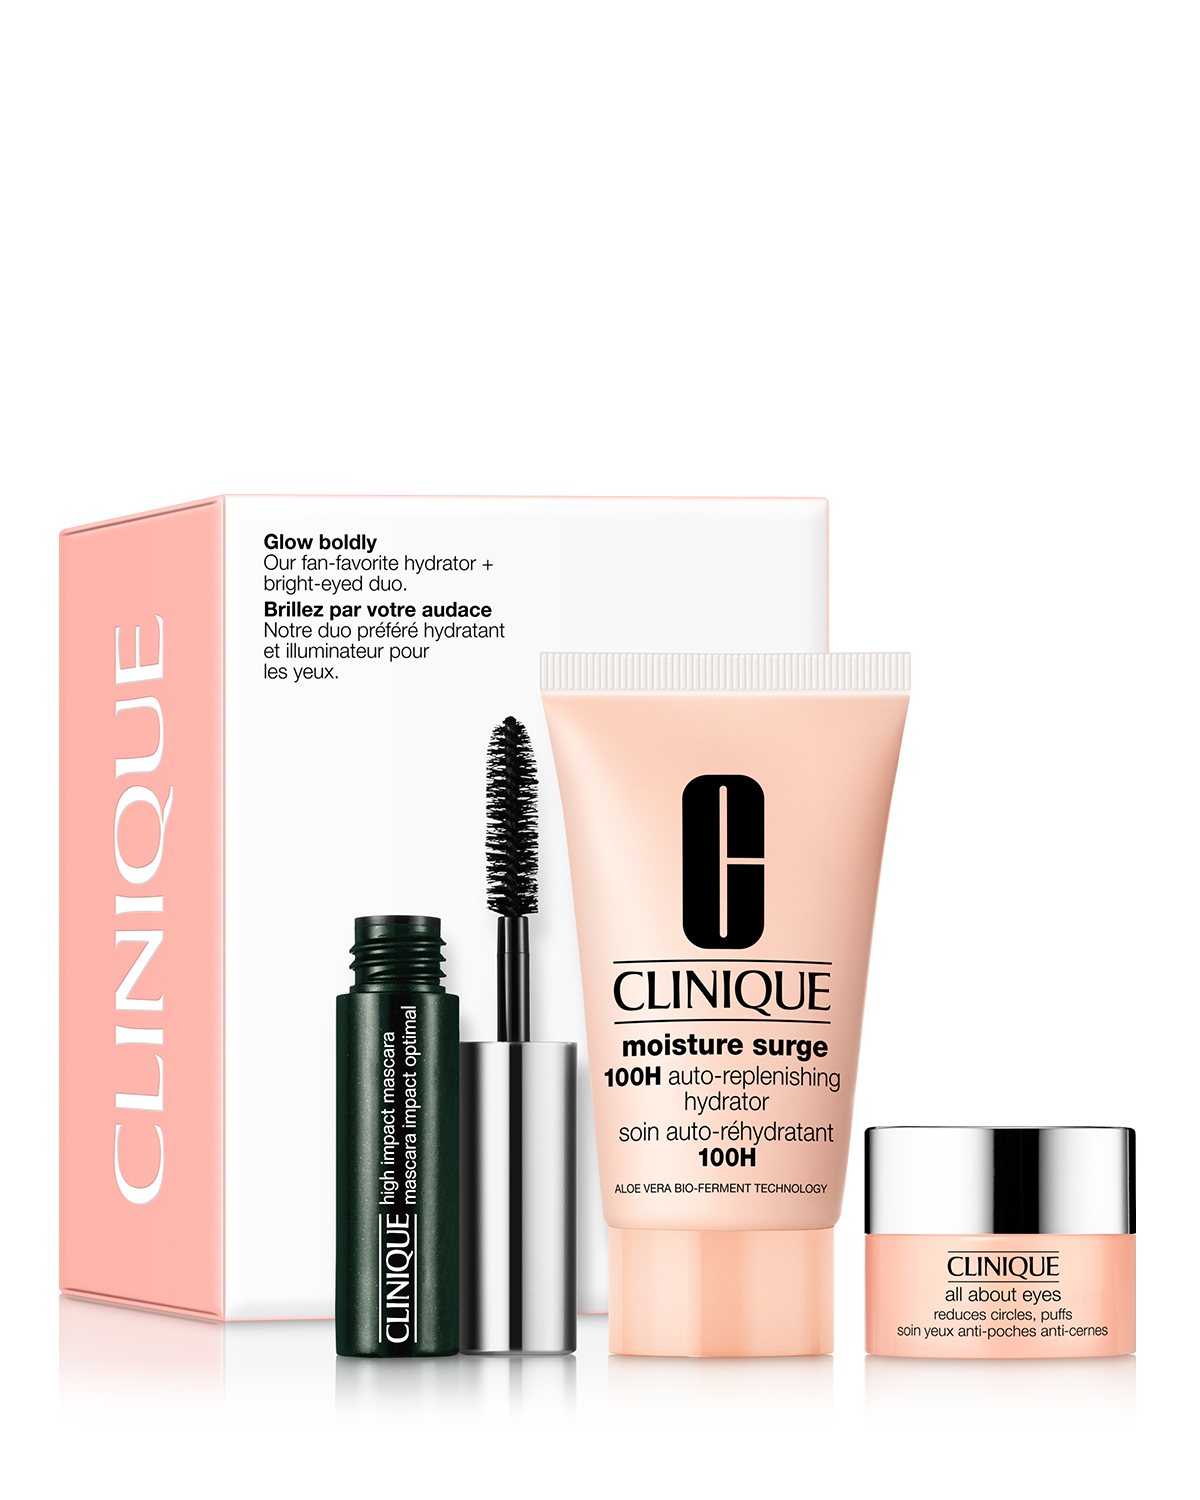 Glow Boldly Skincare and Makeup Gift Set 